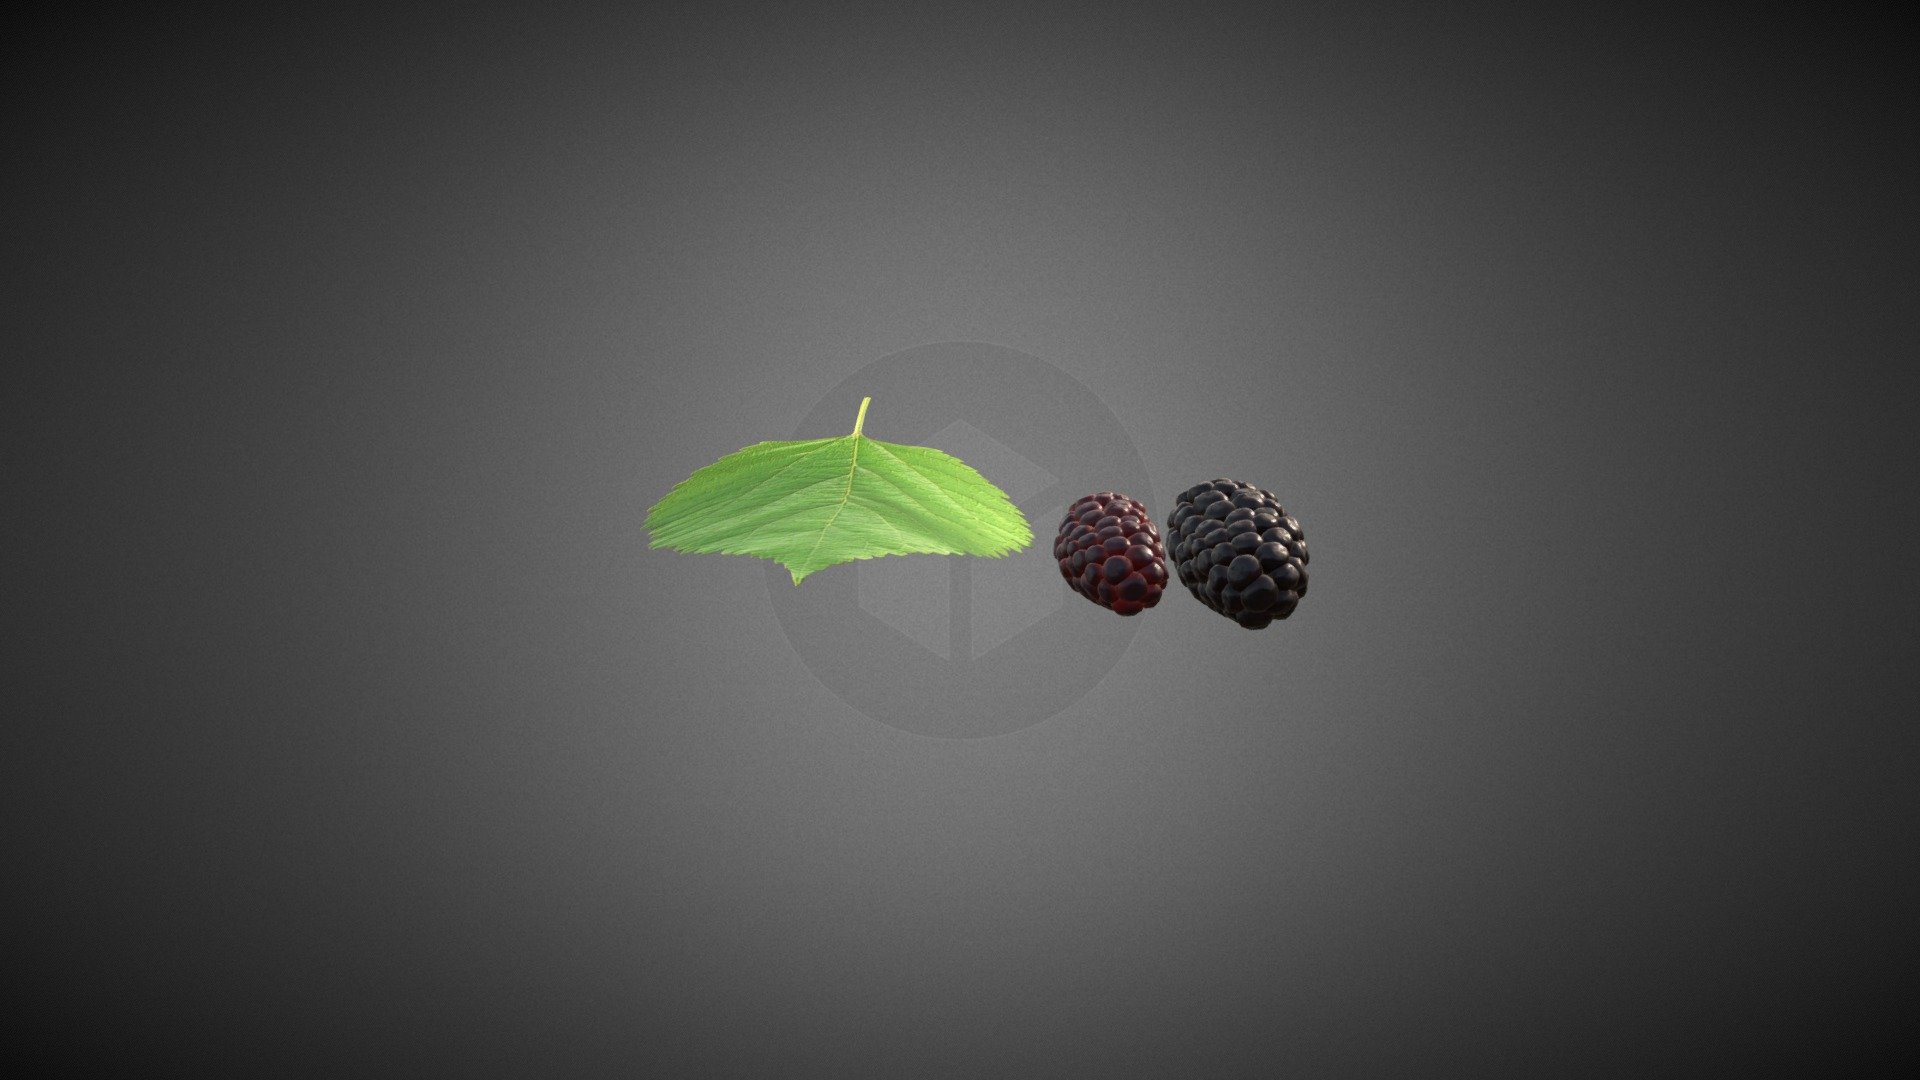 Mulberry 3D model includes:


Red mulberry
Black mulberry
Mulberry leaf

Fun fact: Mulberries are a rich source of vitamin C, vitamin A, vitamin E, vitamin K and minerals such potassium, iron and magnesium. Mulberries can be eaten raw or in the form of jams, pies and muffins.

All textures and materials are included and mapped in every format. The model is completely ready for use visualization in any 3d software and engine.

Technical details:


File formats included in the package are: FBX, OBJ, GLB, ABC, DAE, PLY, STL, x3d, BLEND, gLTF (generated), USDZ (generated)
Native software file format: BLEND
Polygons: 20,336
Vertices: 17,685
Textures: Color, Metallic, Roughness, Normal.
All textures are 2k resolution.
 - Mulberry 3D Model - Buy Royalty Free 3D model by 3DDisco 3d model